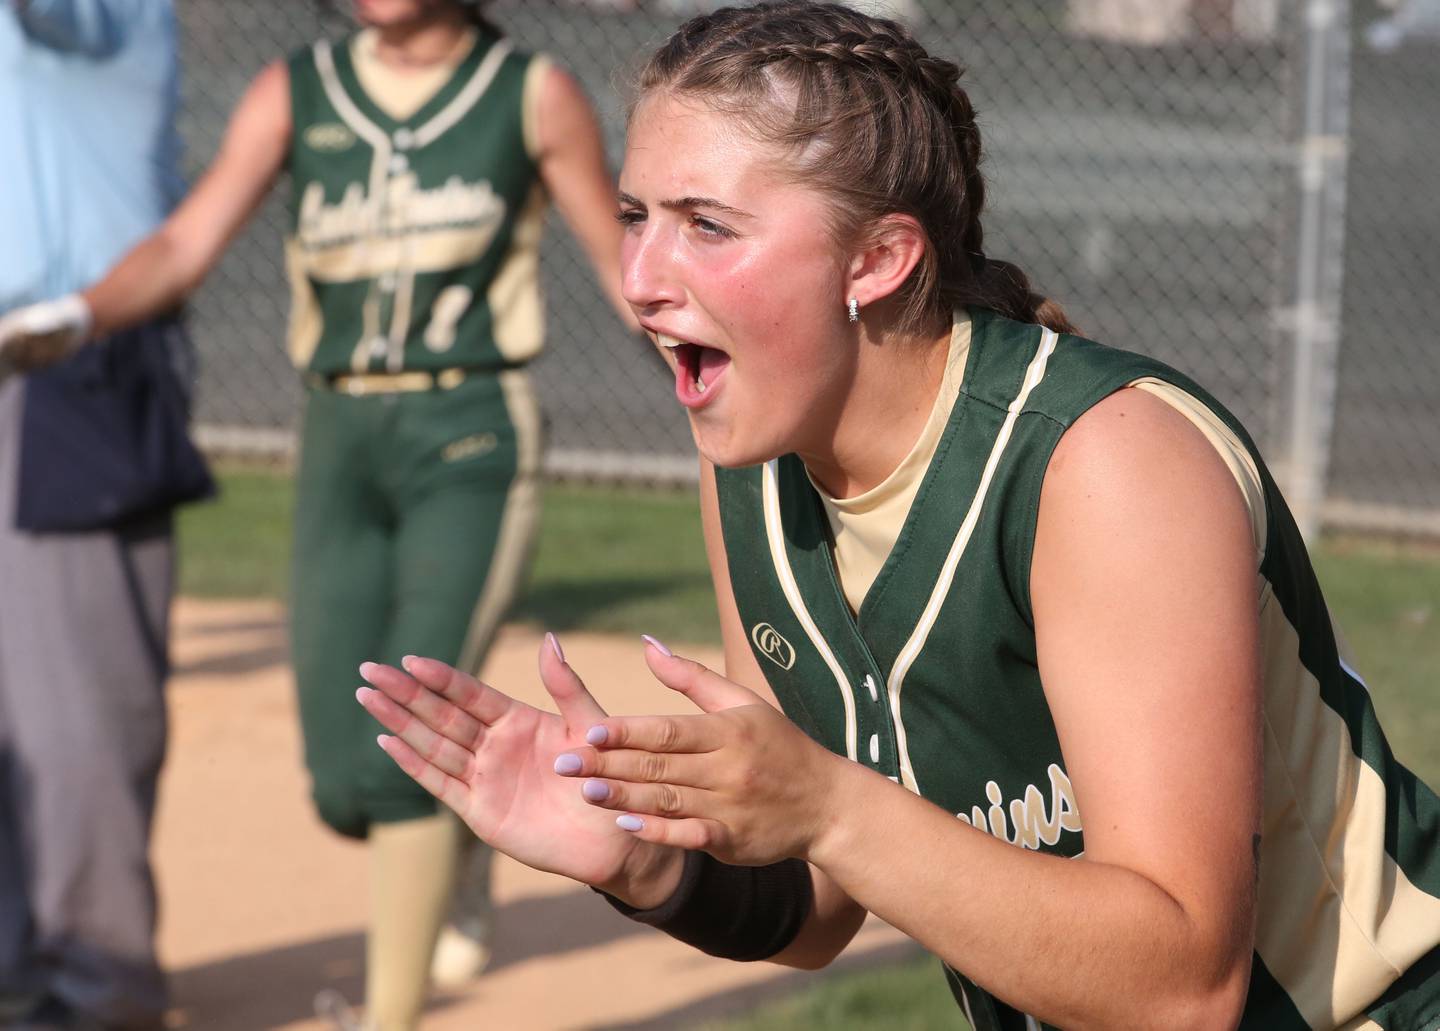 St. Bede's Addison Bontz cheers on her teammates in the Class 1A Sectional semifinal game on Tuesday, May 23, 20223 at St. Bede Academy.